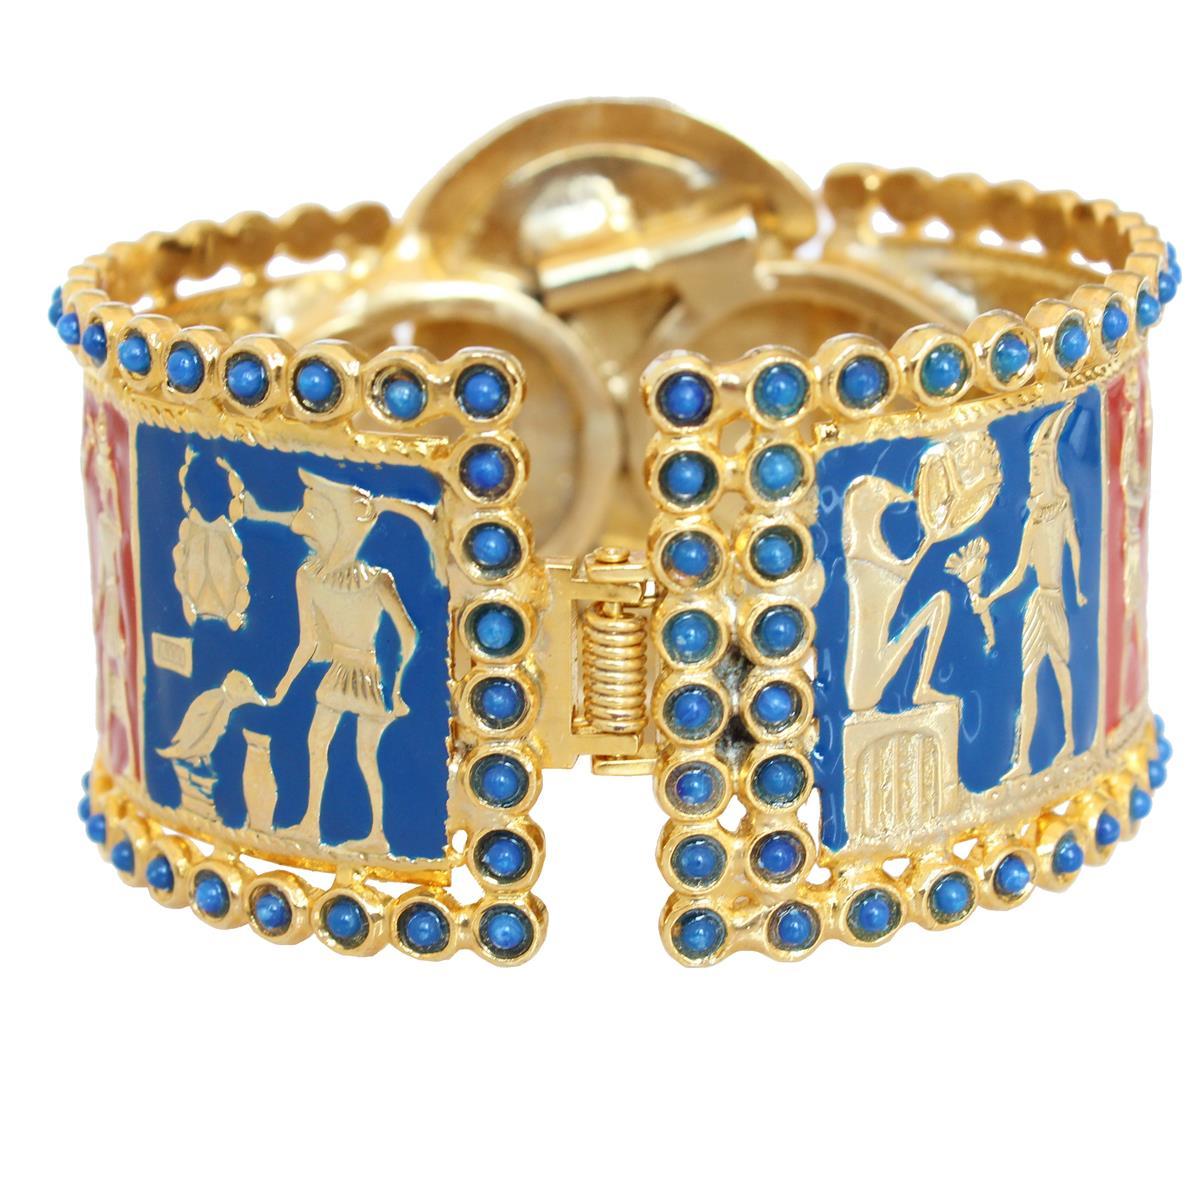 Fantastic masterpiece by Carlo Zini
One of the world greatest bijoux designers
Non allergenic rhodium
18 Kt Gold dipped
Amazing hand creation of beads, resins and colored elements
Egypt theme
Wrist cm 16 (6.29 inches)
100% Artisanal work
Made in